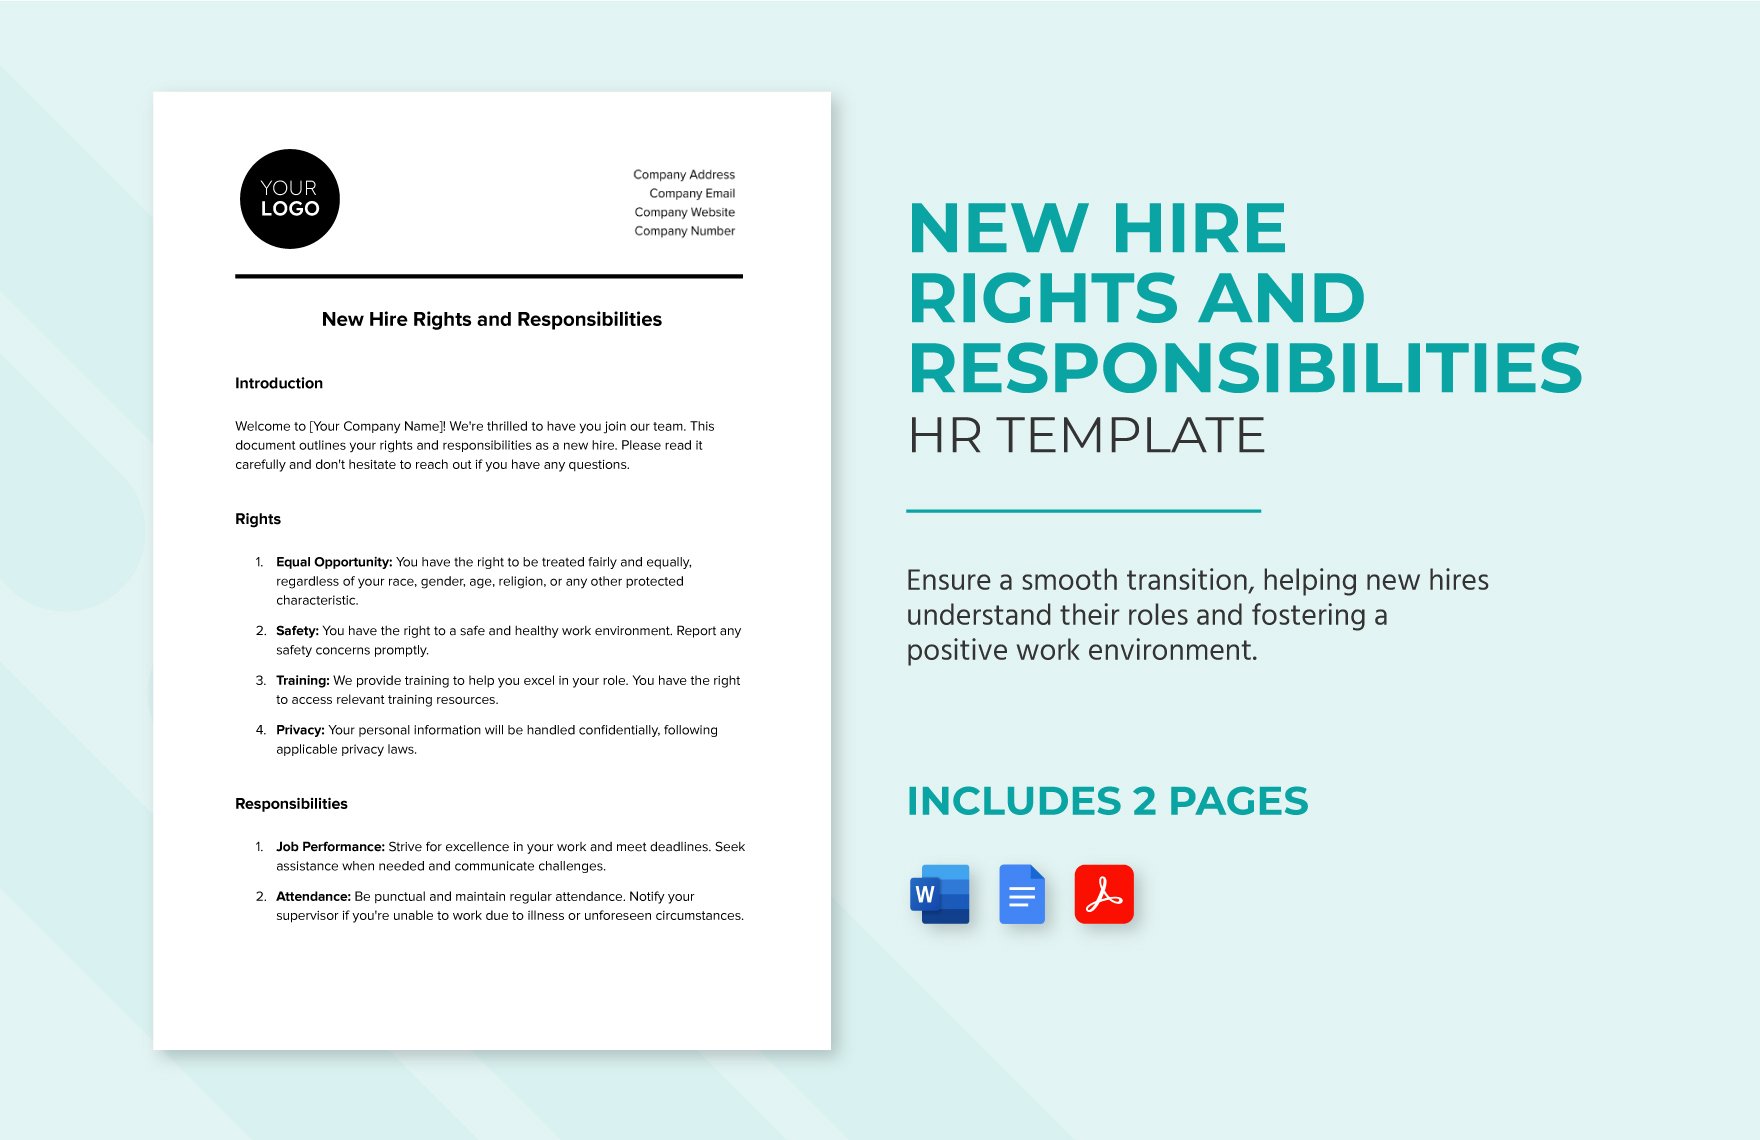 New Hire Rights and Responsibilities HR Template in Word, Google Docs, PDF